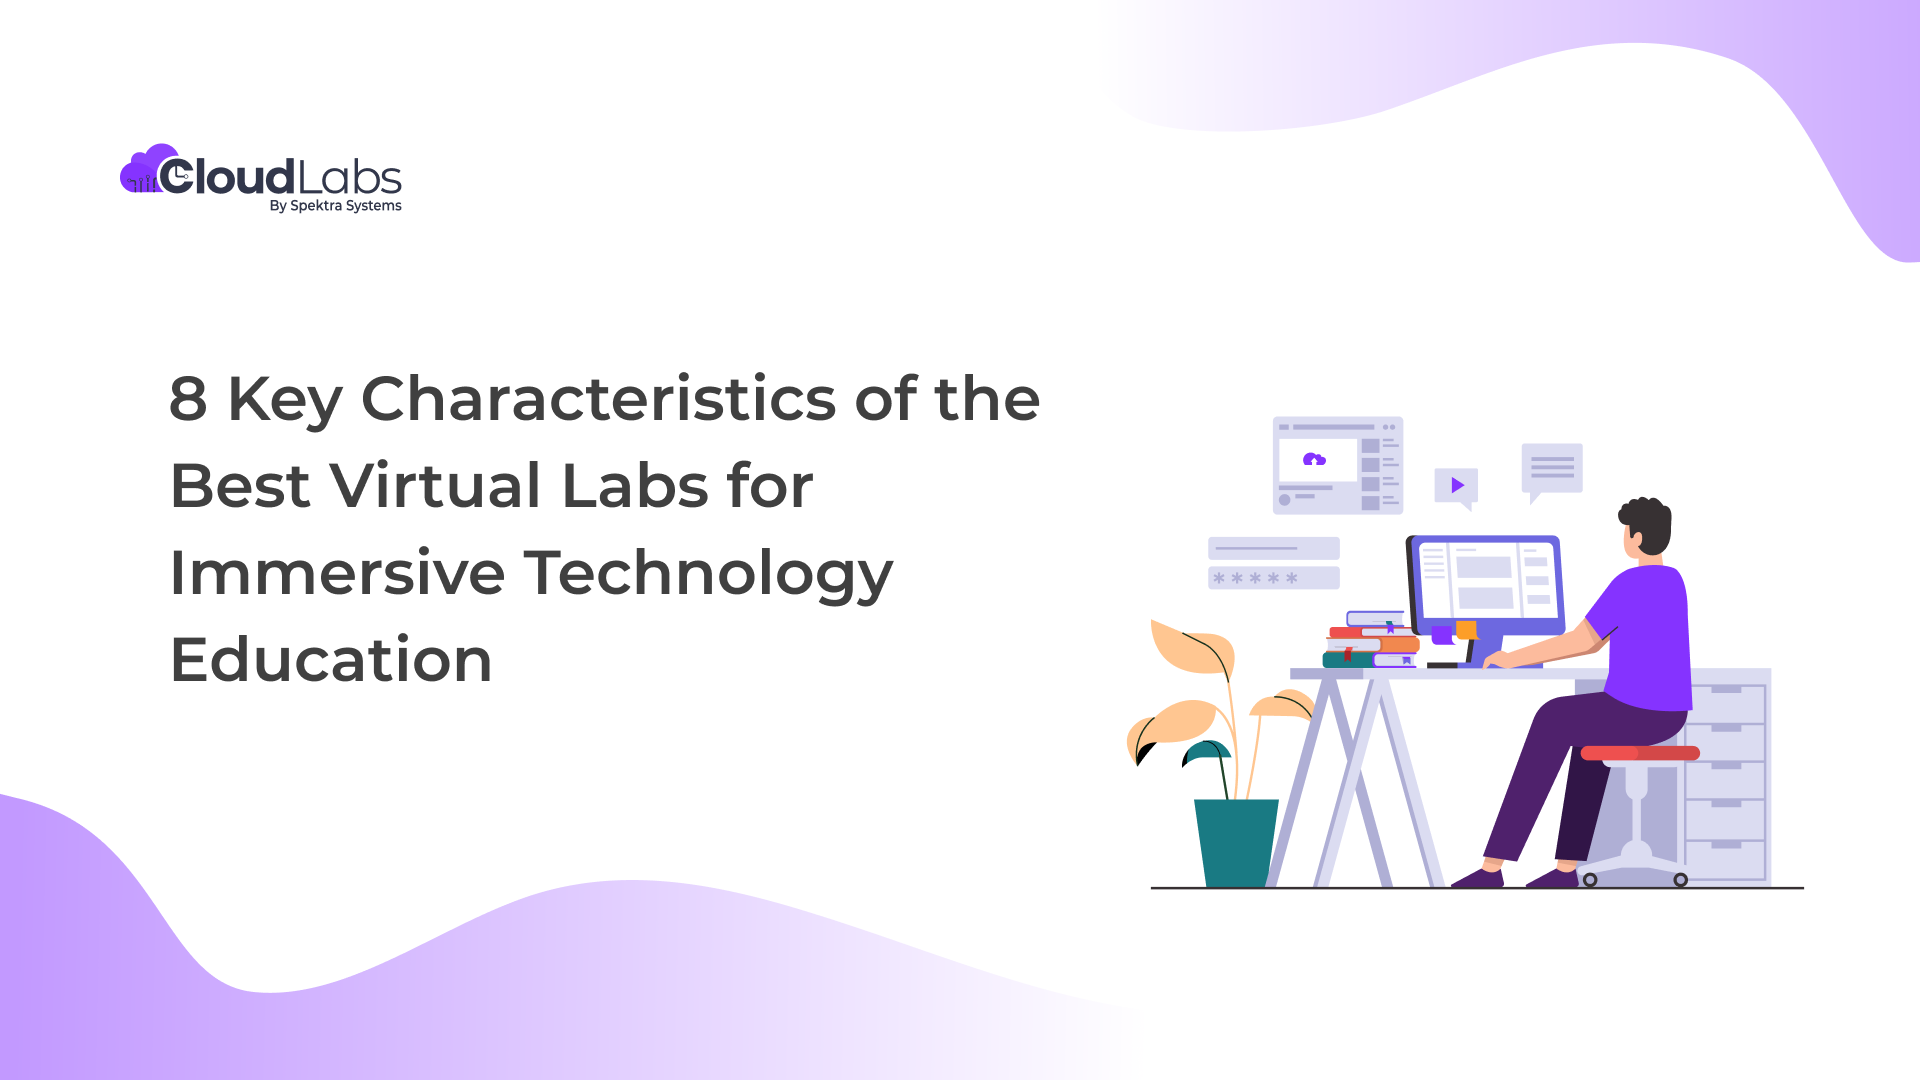 8 Key Characteristics of the Best Virtual Labs for Immersive Technology Education